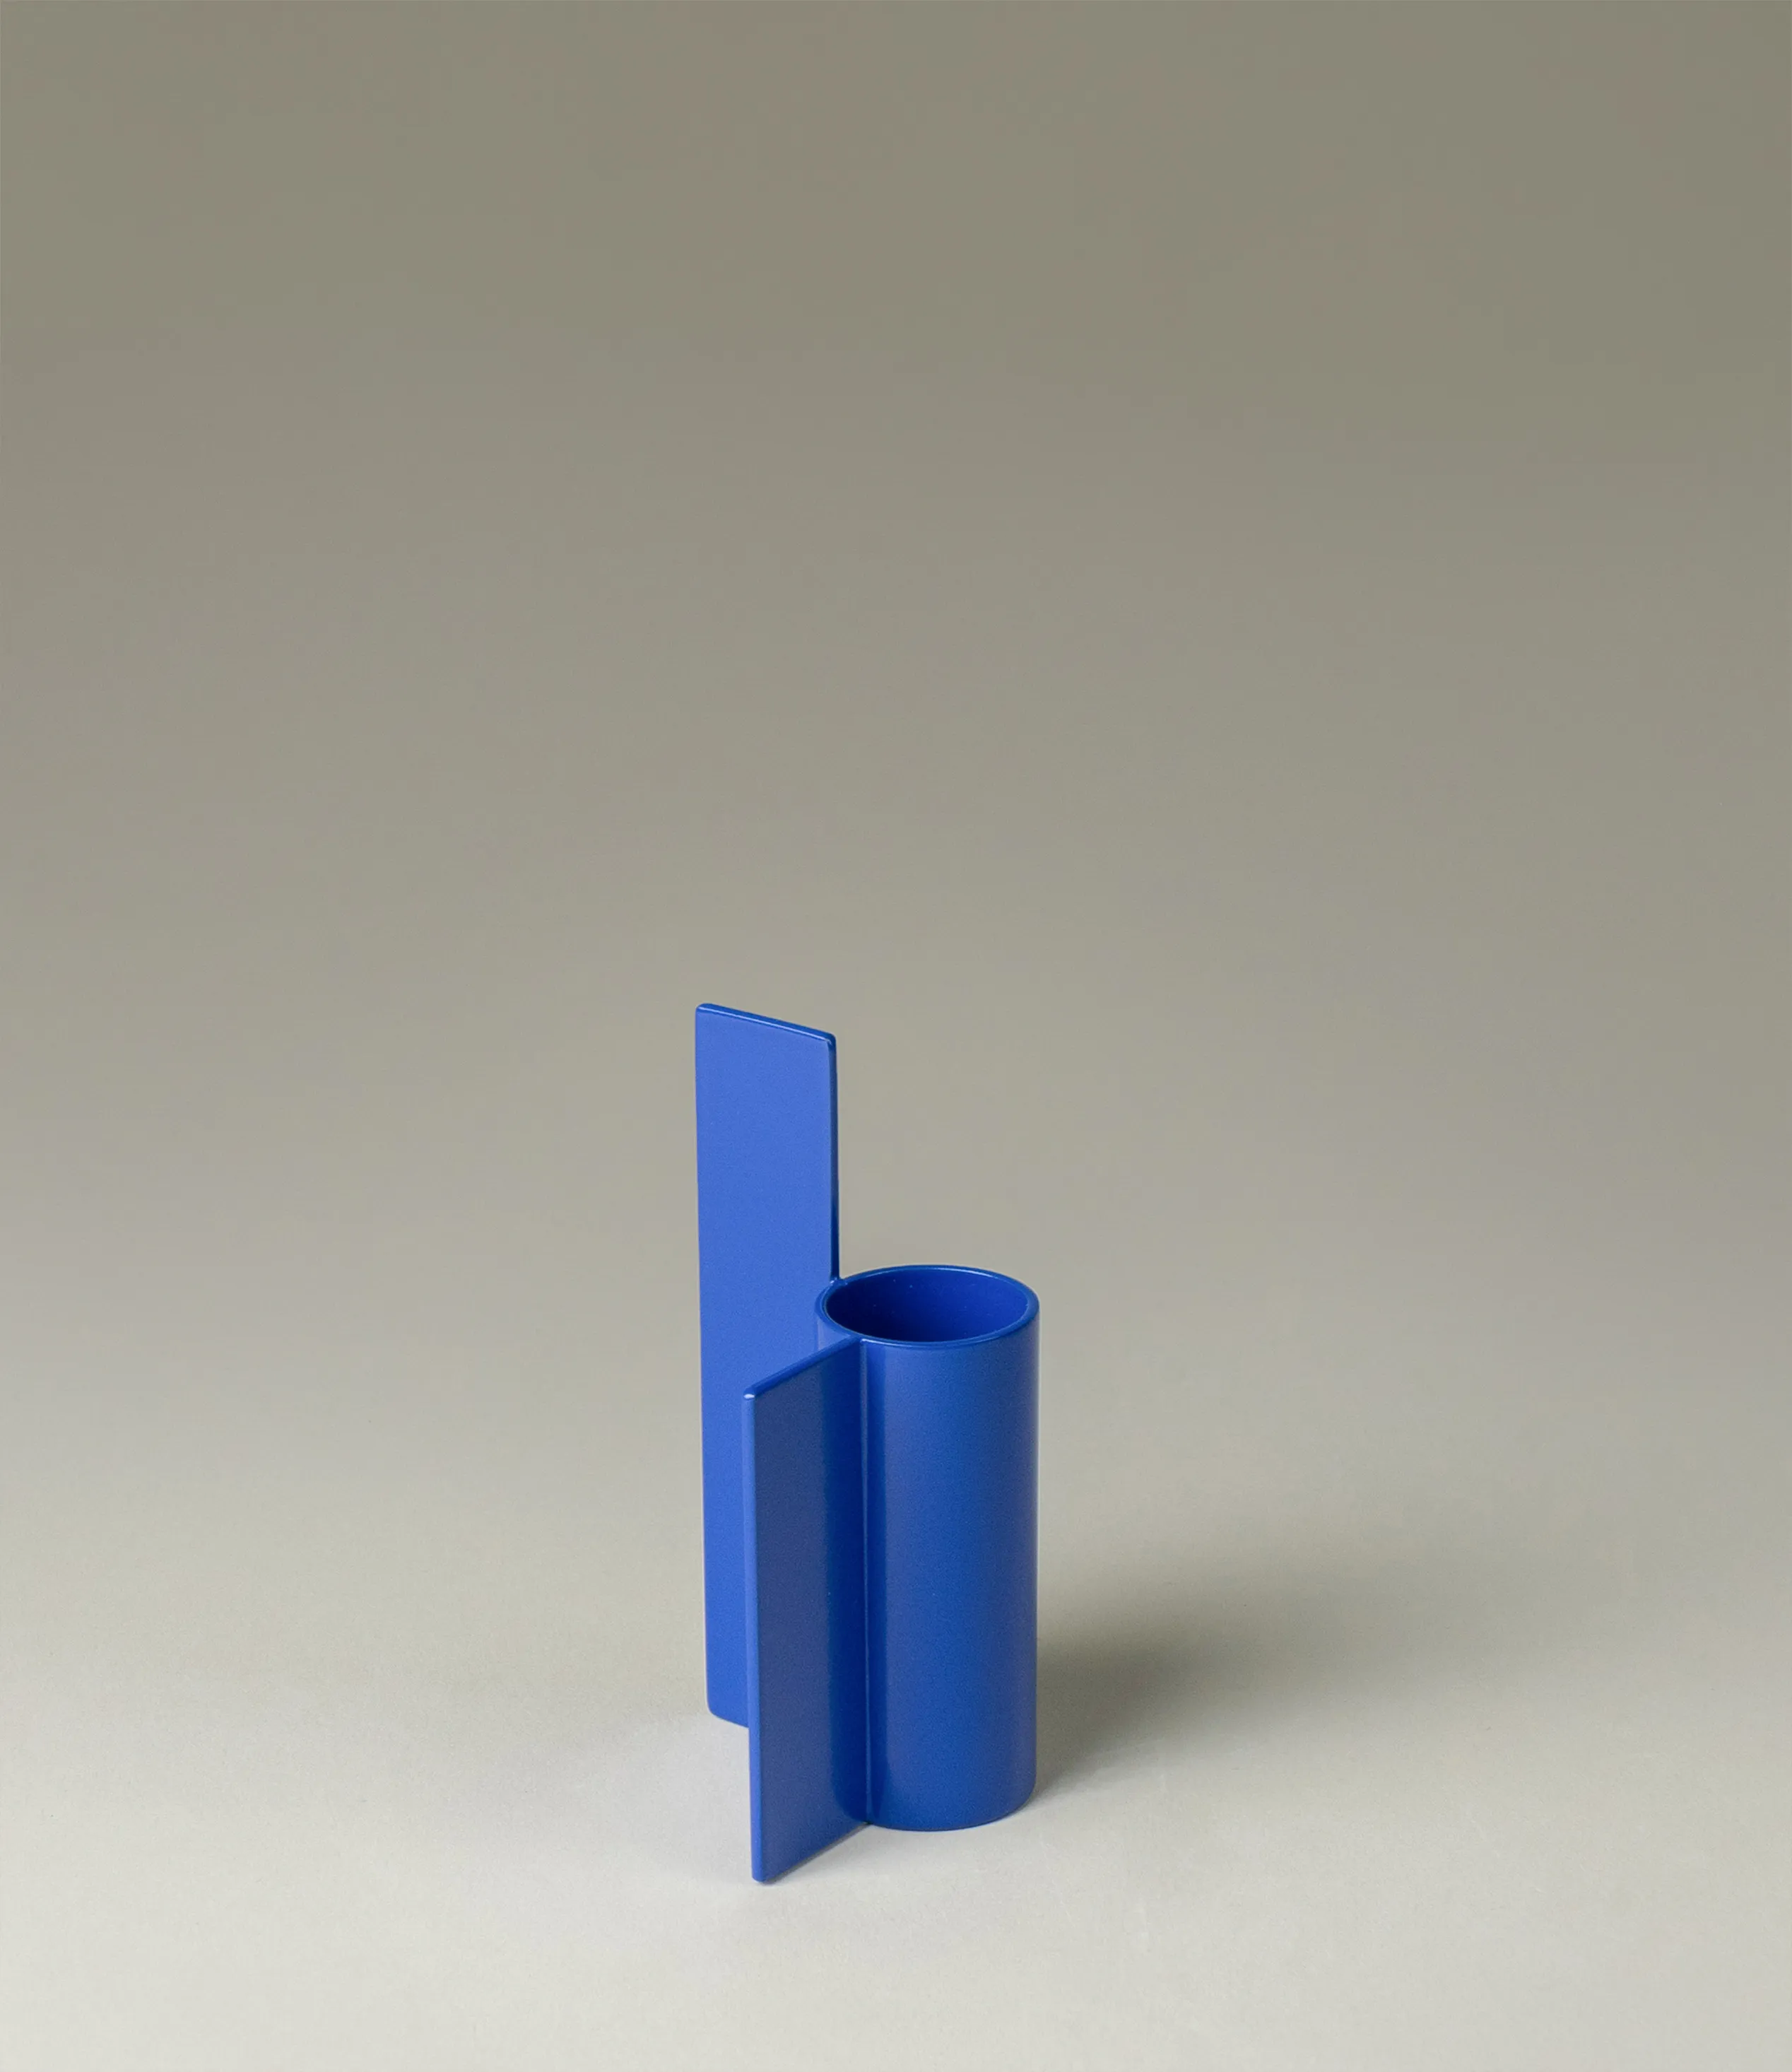 Icon Iysestage 03 from Stences is a candleholder made for taper candles. This picture shows the blue variant of this item. The steel material has a glossy surface which emphasize the soft geometric shapes of the product in question.